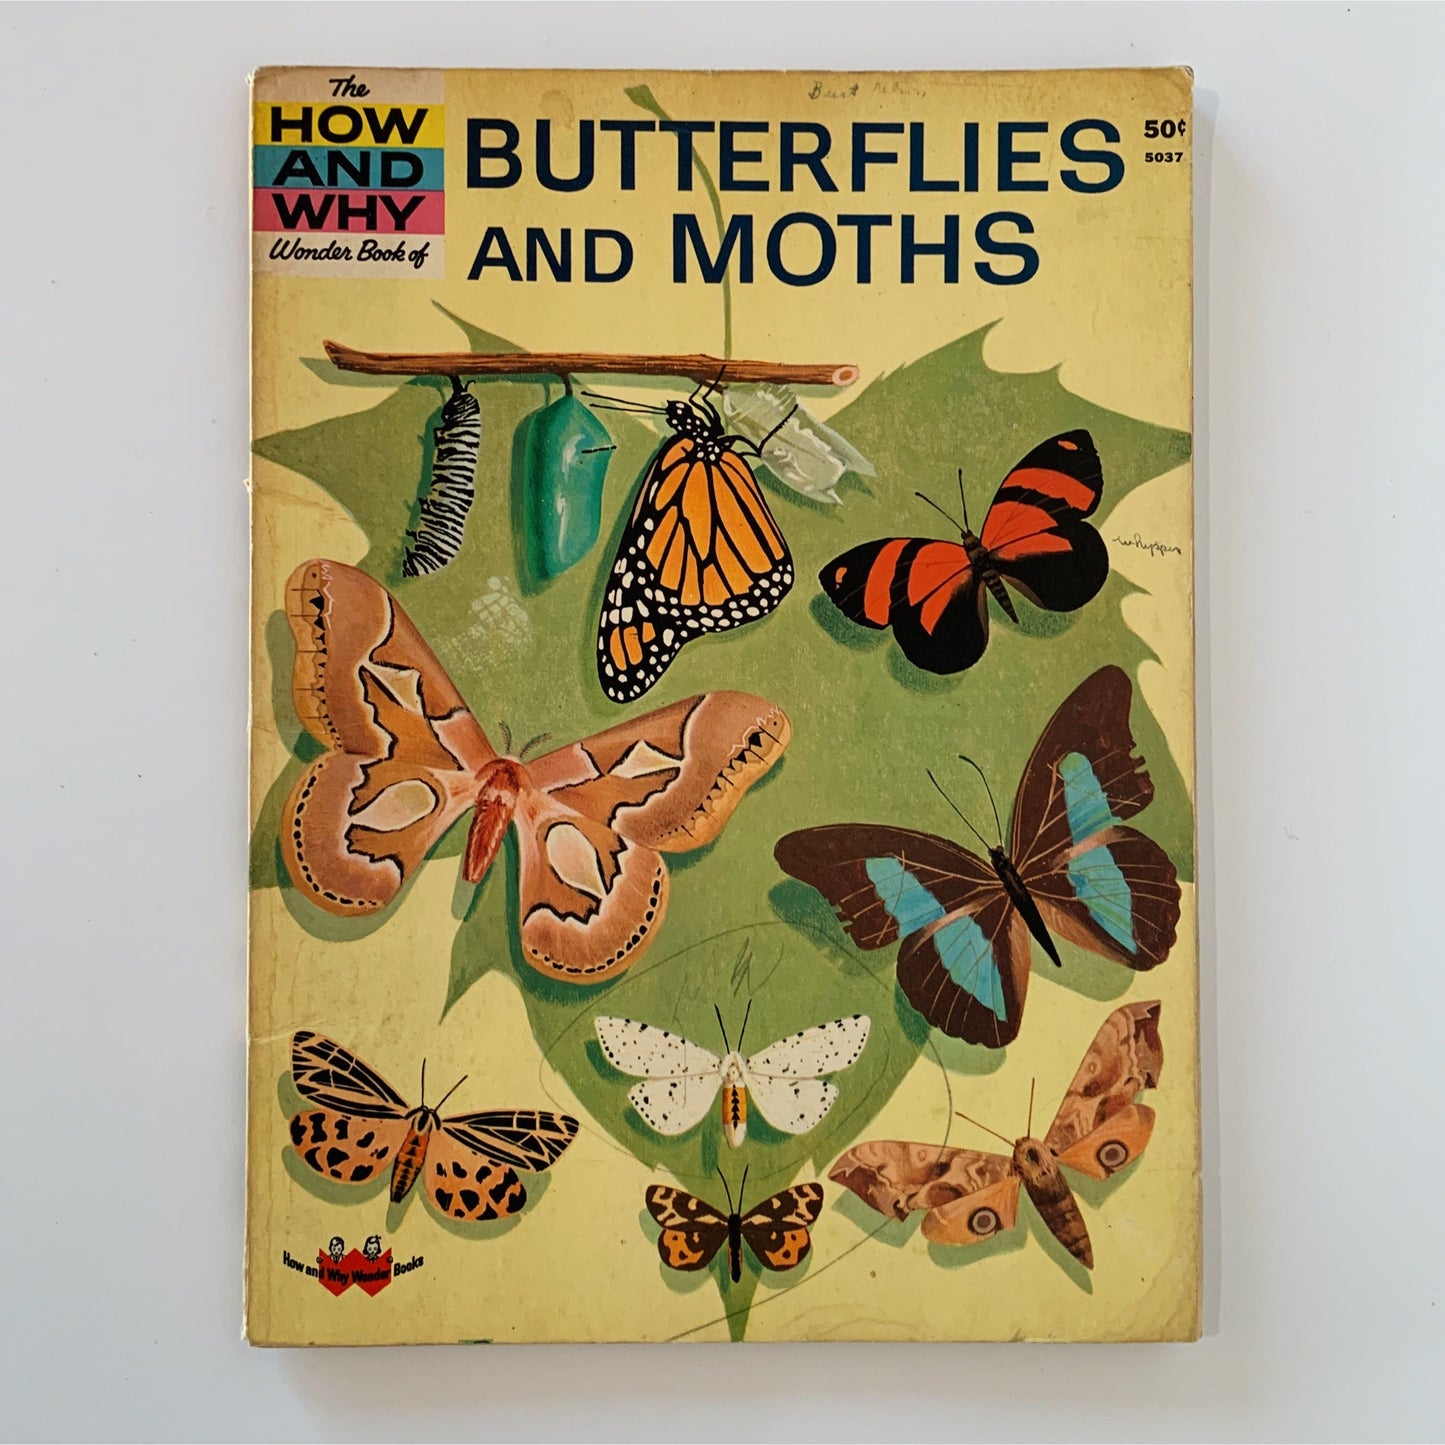 The How and Why Wonder Book of Butterflies and Moths, 1963